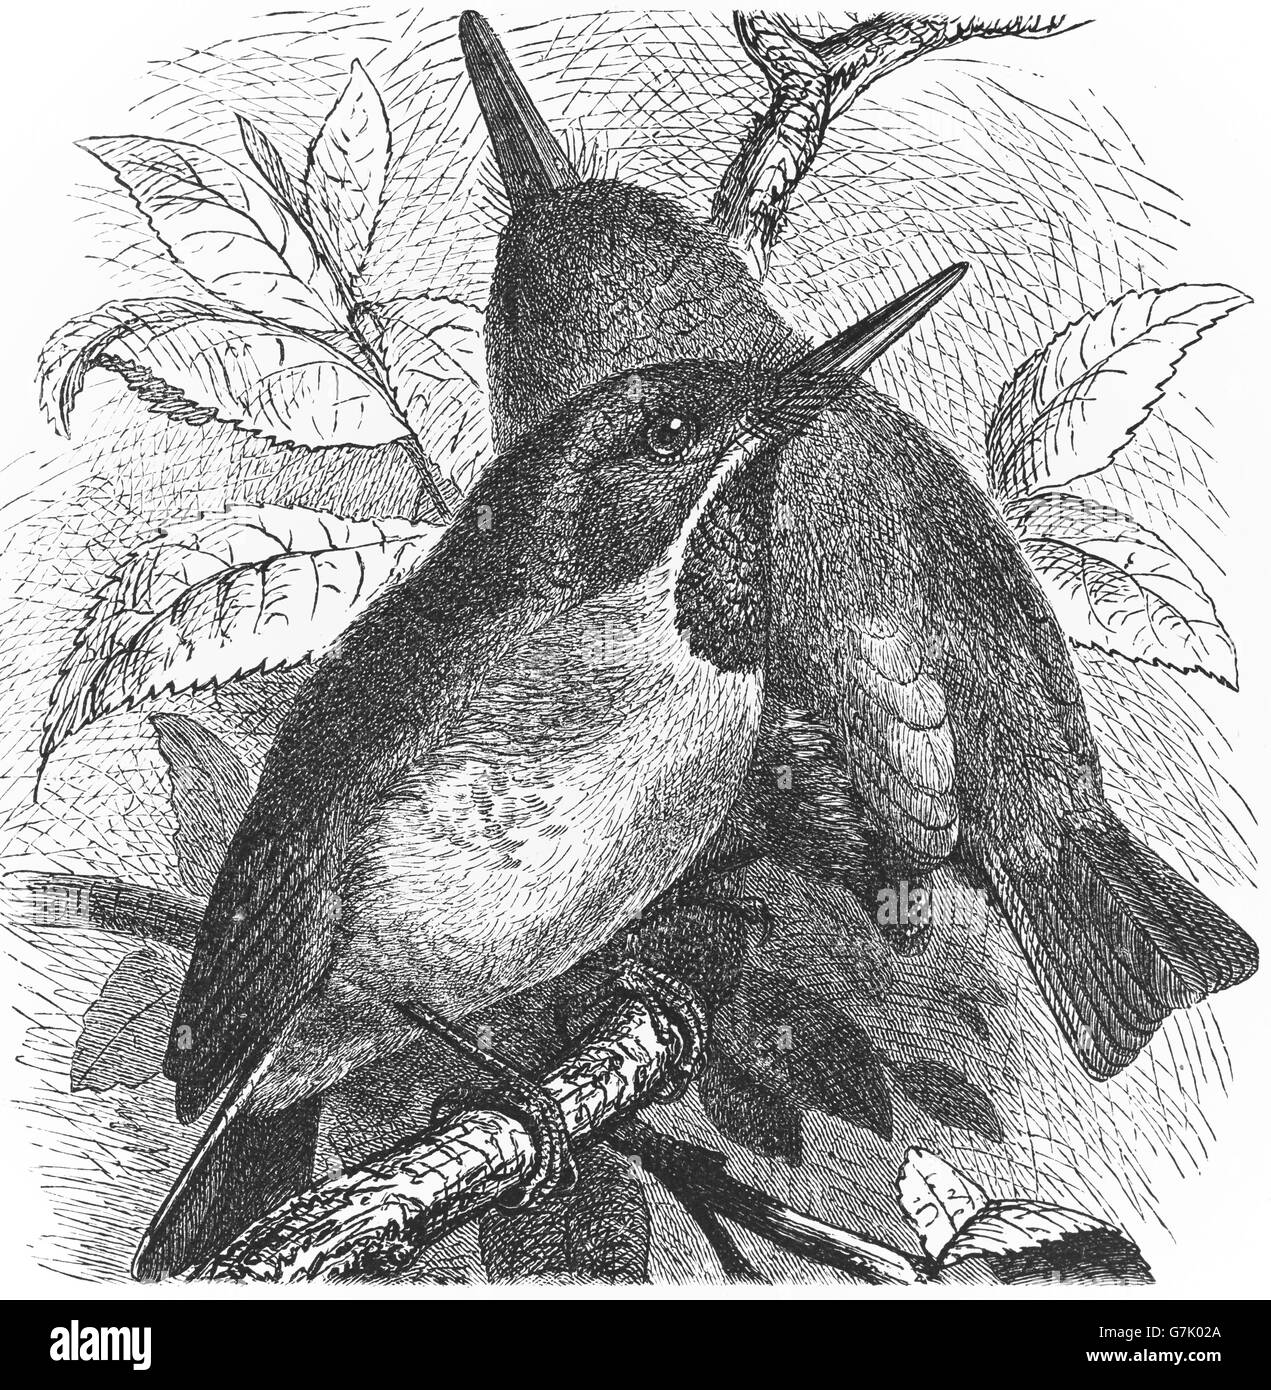 Jamaican tody, Todus todus, illustration from book dated 1904 Stock Photo